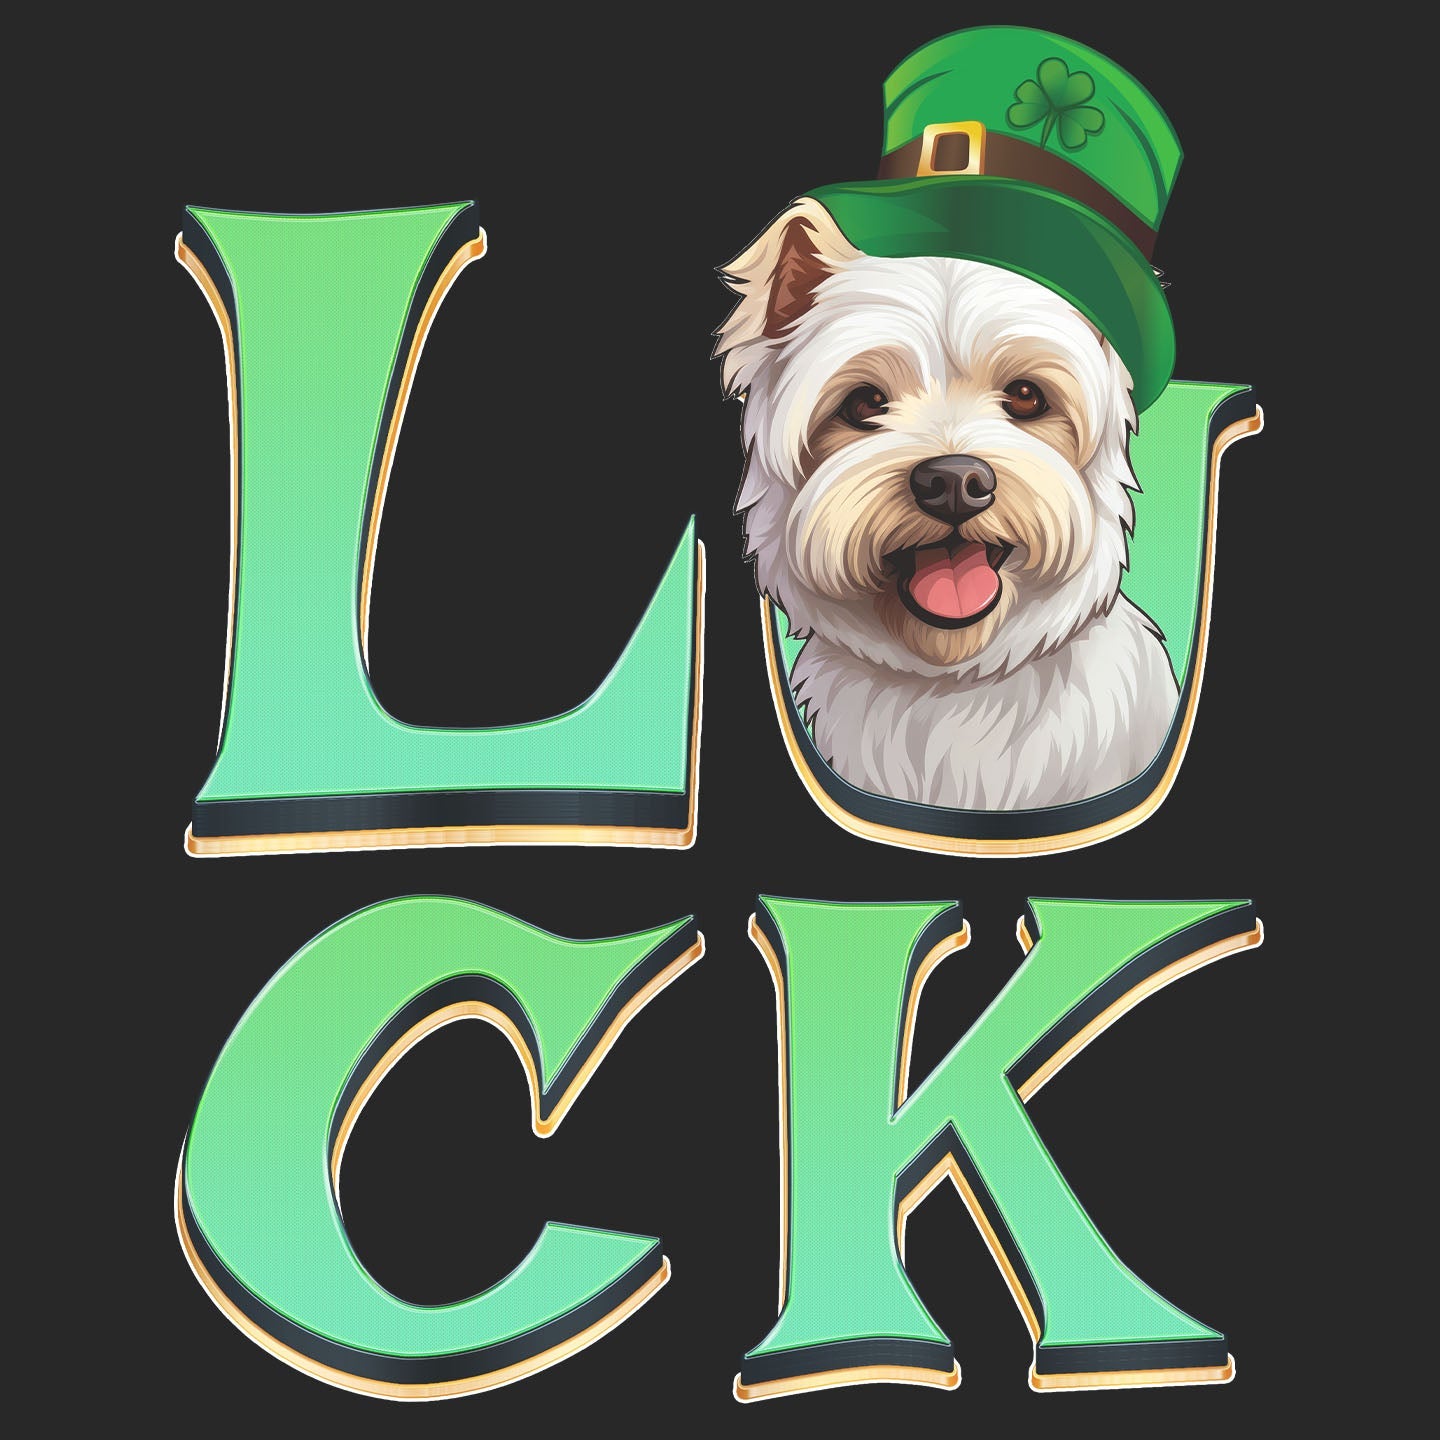 Big LUCK St. Patrick's Day West Highland White Terrier - Adult Unisex T-Shirt